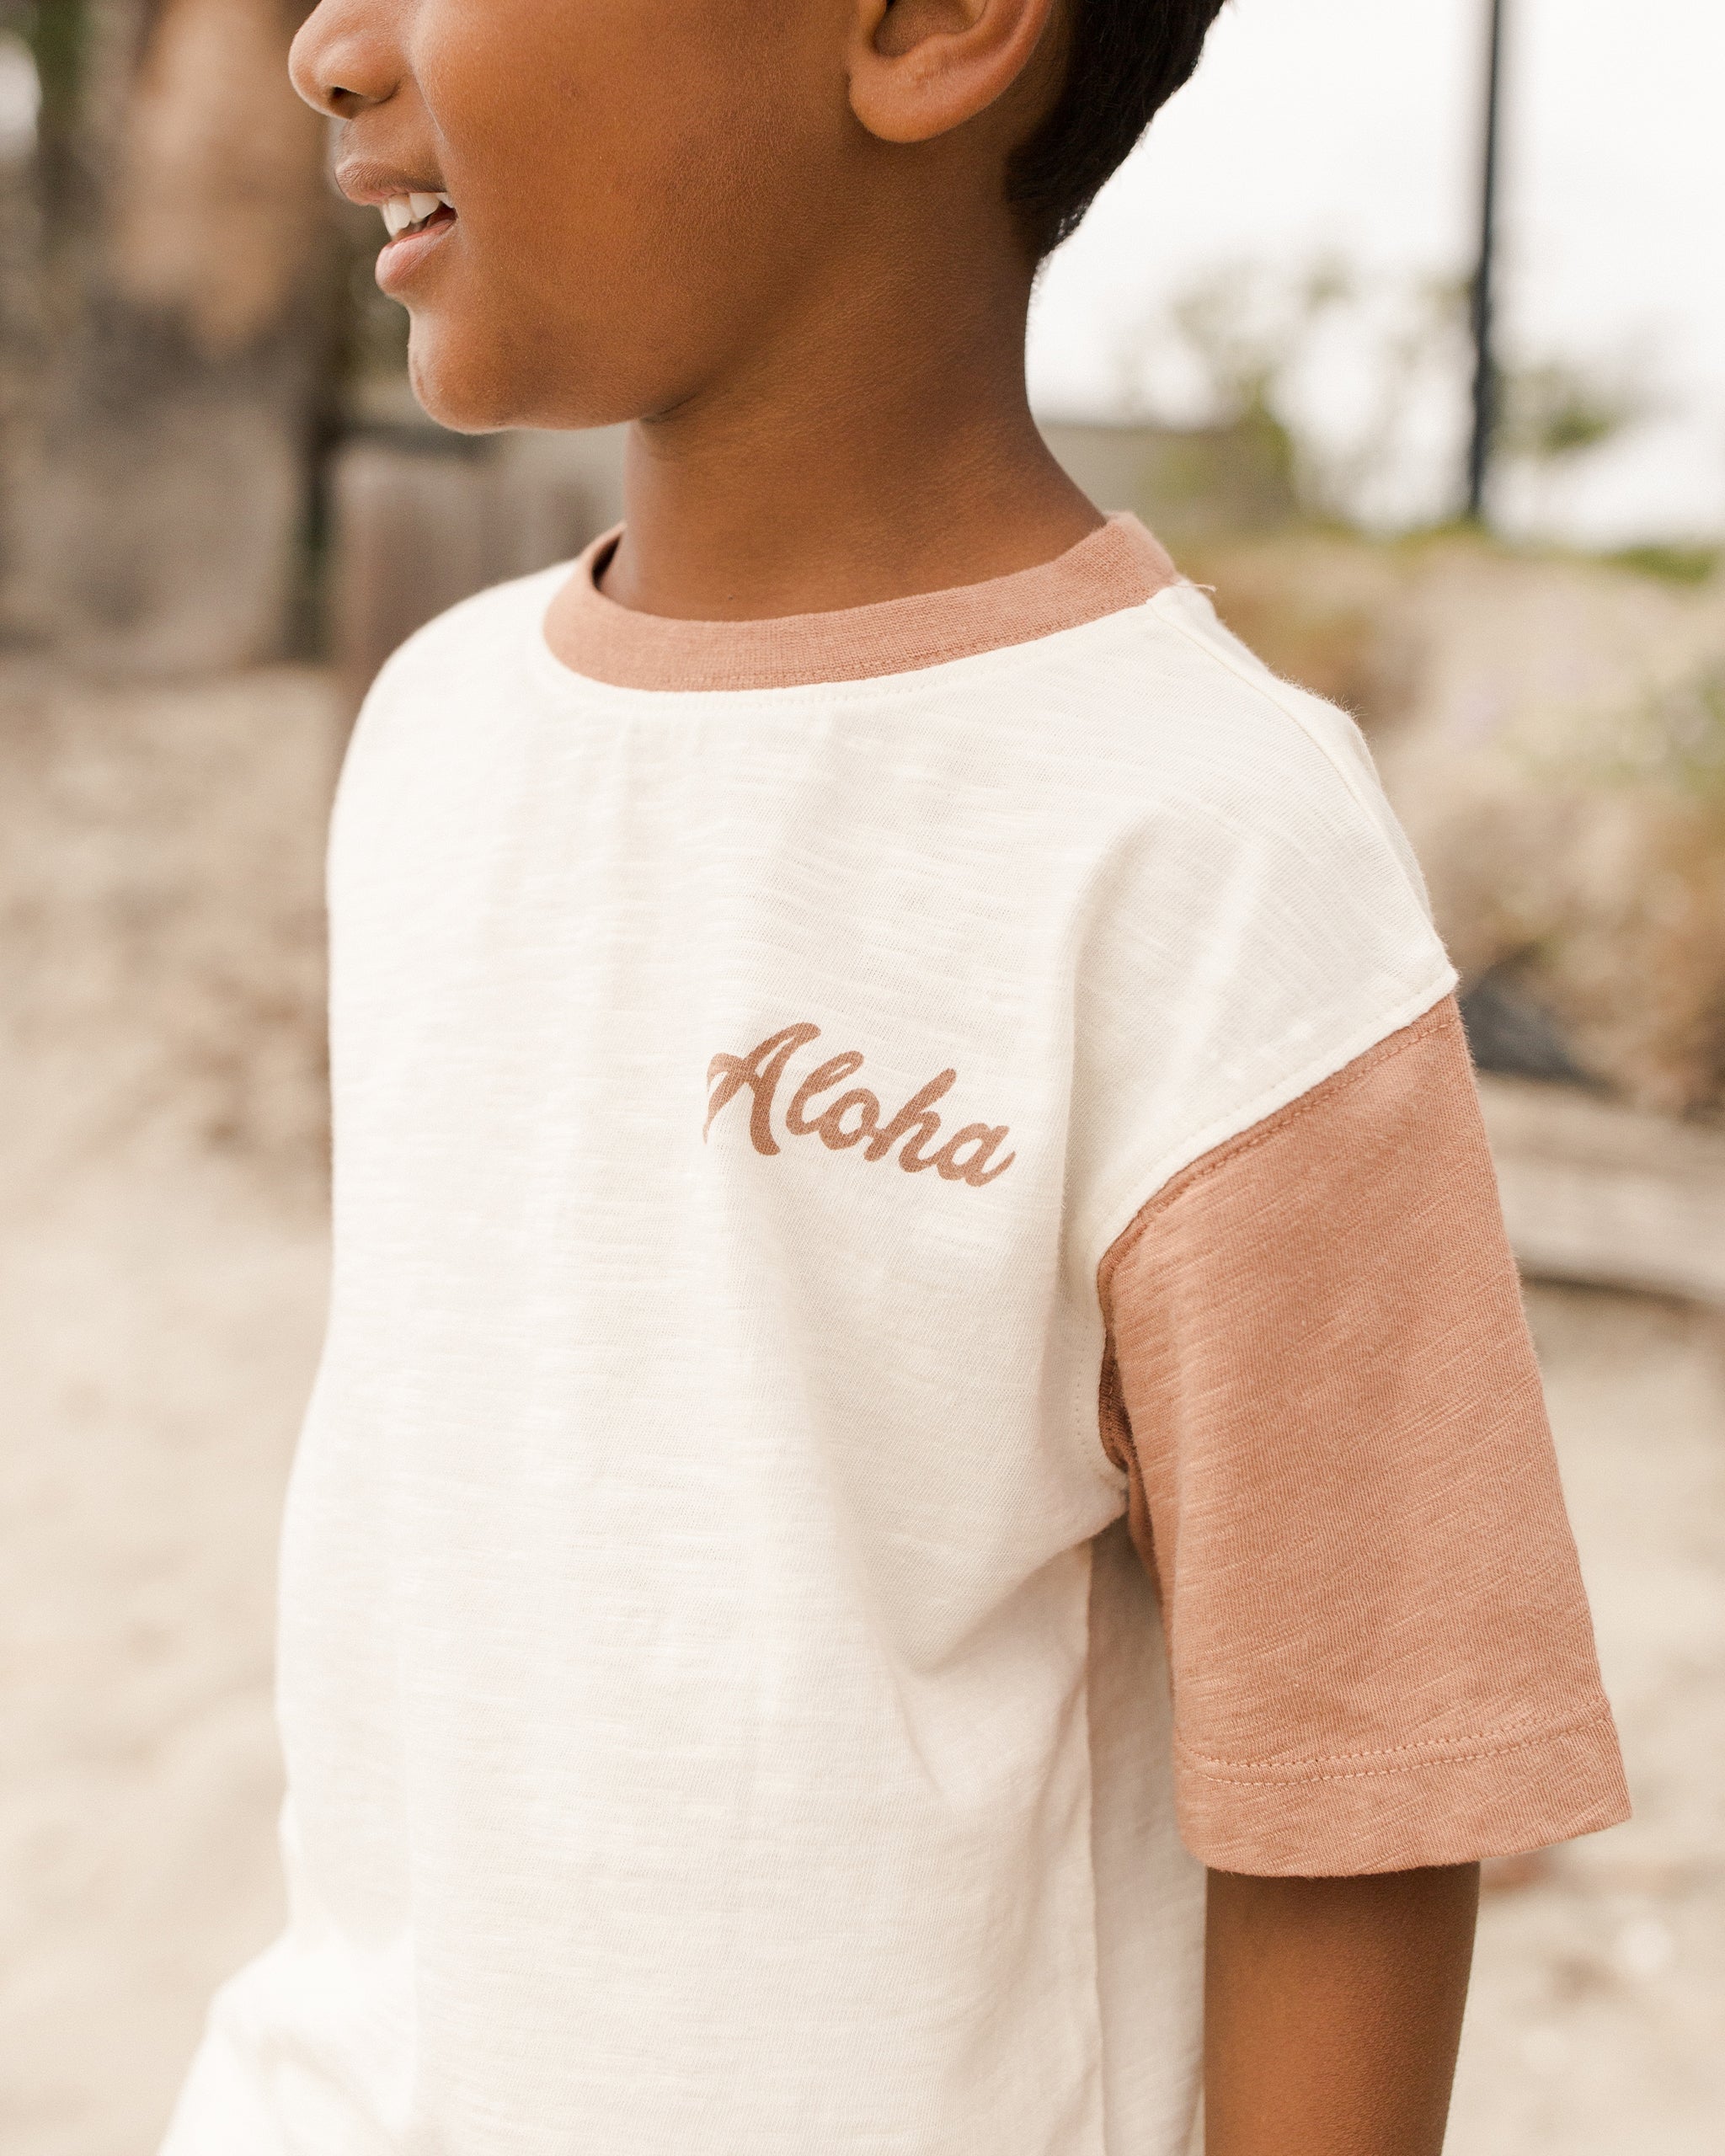 Contrast Short Sleeve Tee || Aloha - Rylee + Cru | Kids Clothes | Trendy Baby Clothes | Modern Infant Outfits |